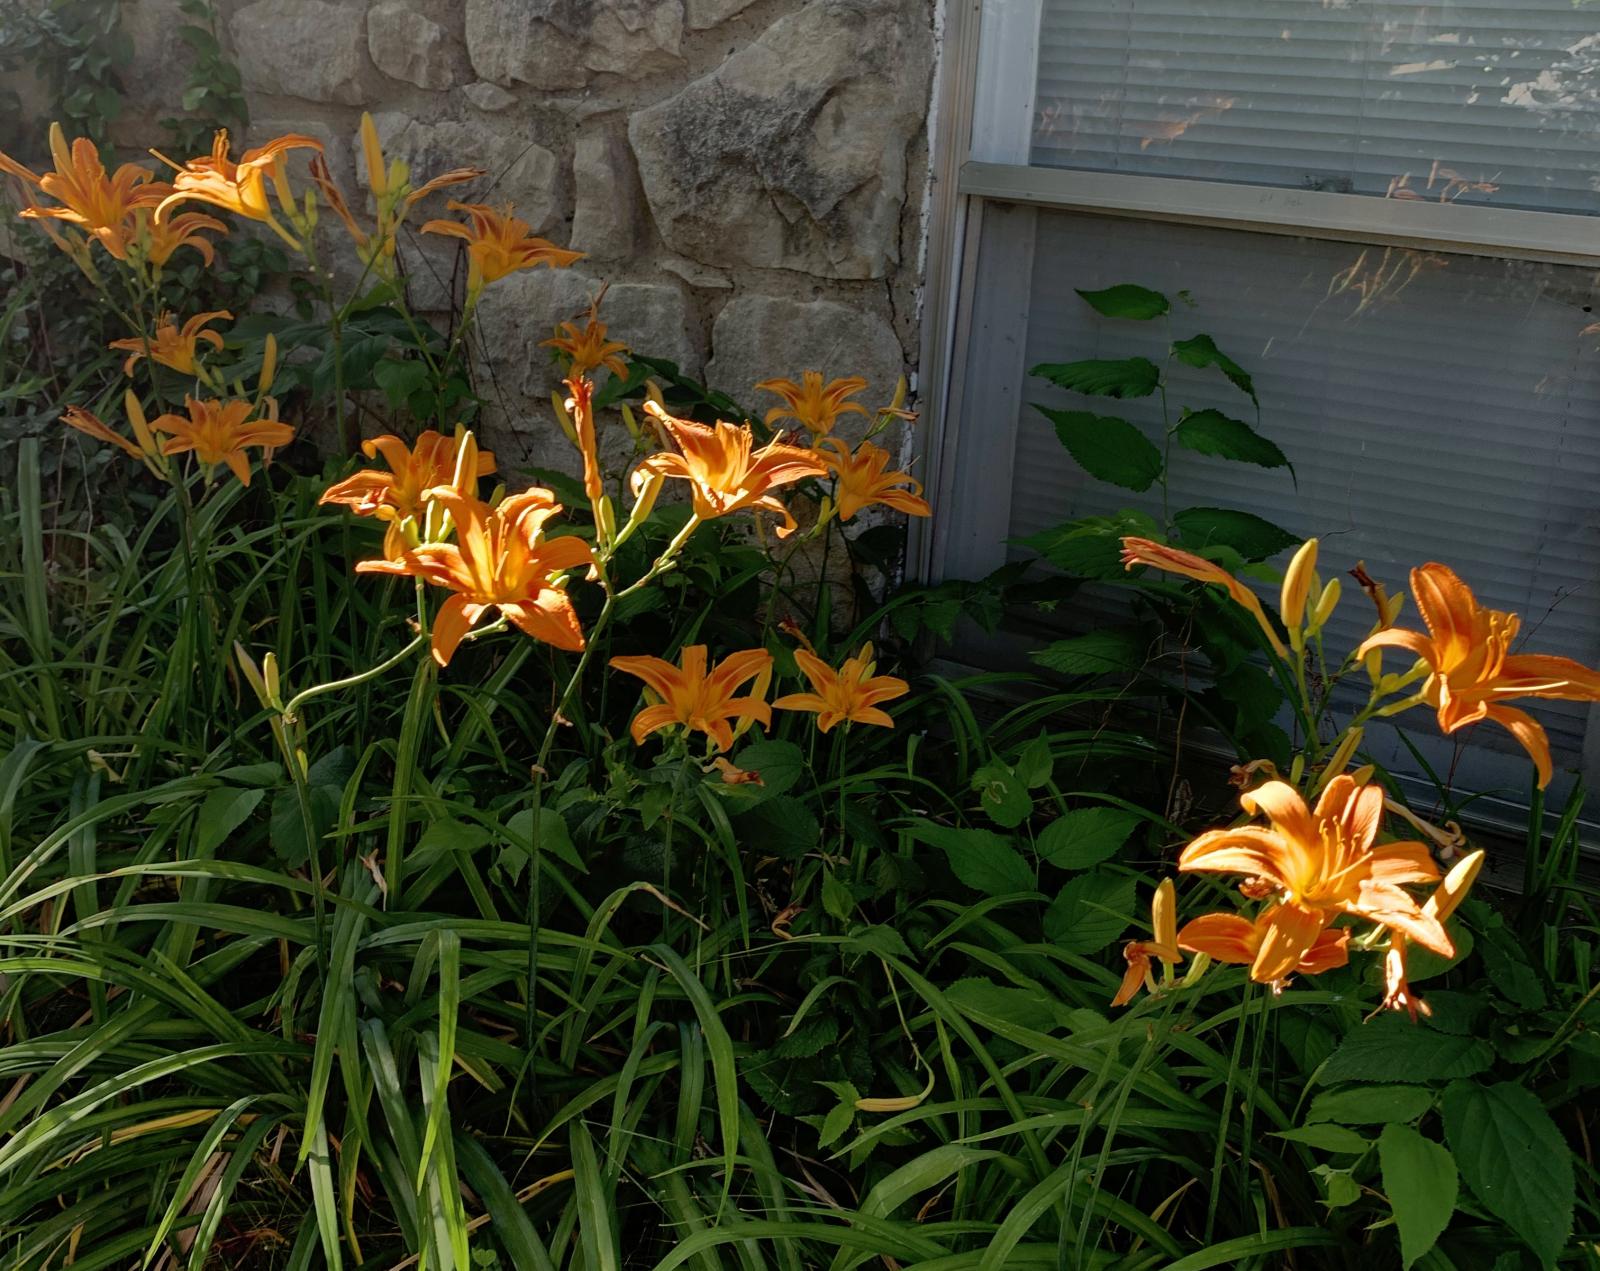 Moments - Lilies glow in the sunshine June 13, 2021, in Columbia,...